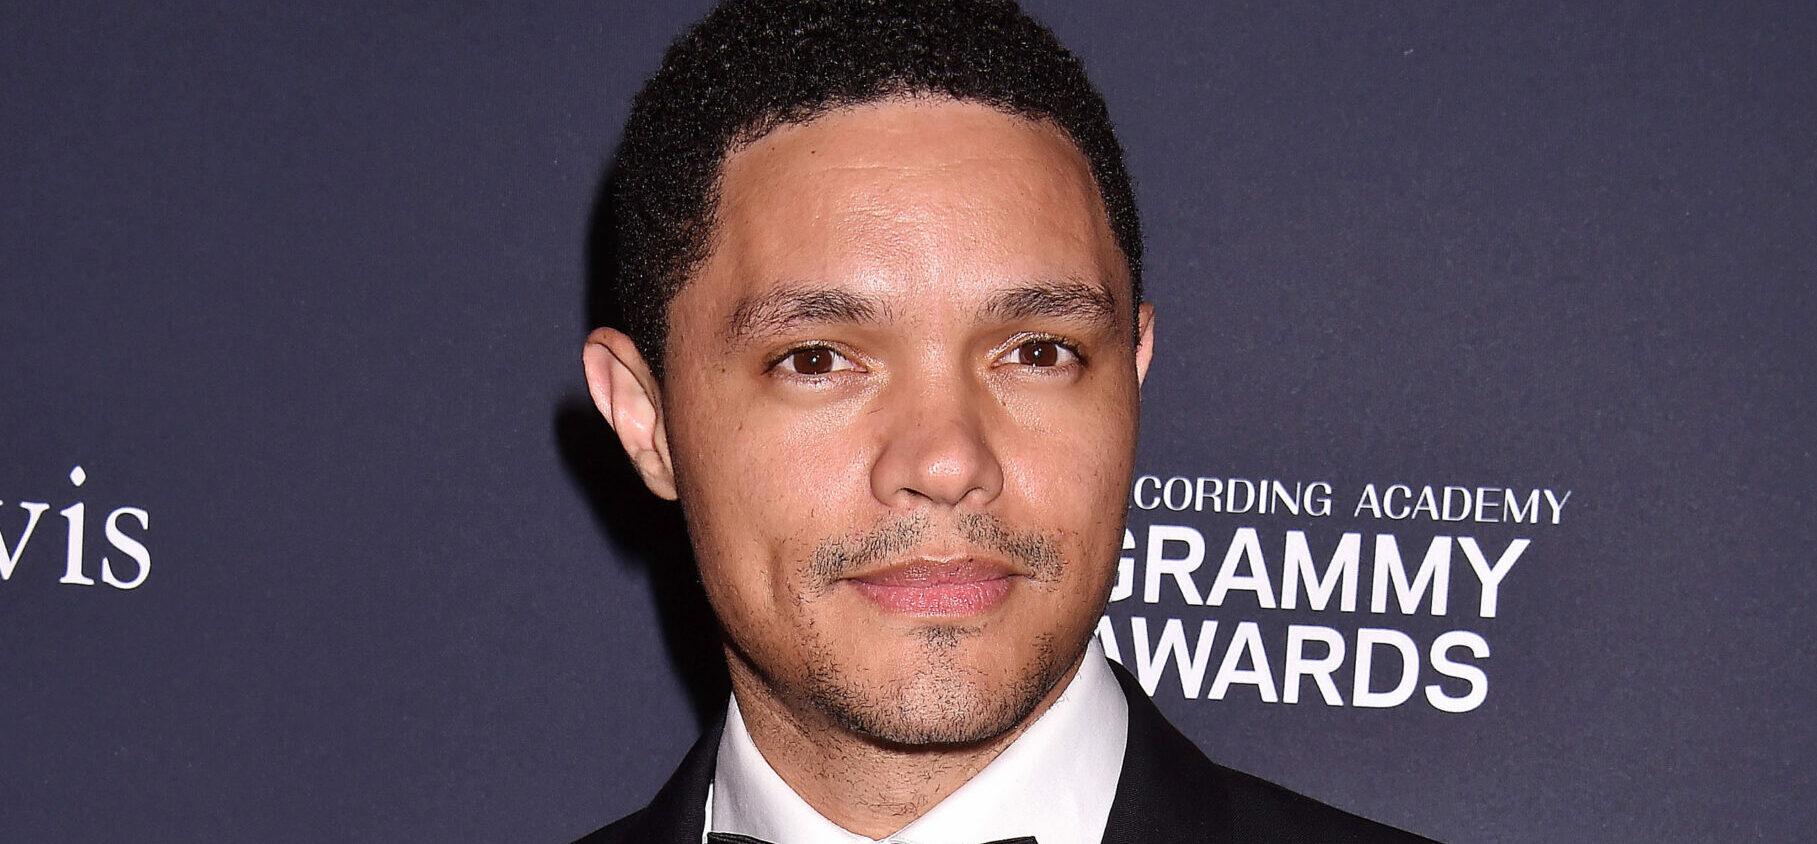 Trevor Noah Sues NYC Hospital, Doctor For Leaving Him ‘Sick, Sore, Lame, And Disabled’